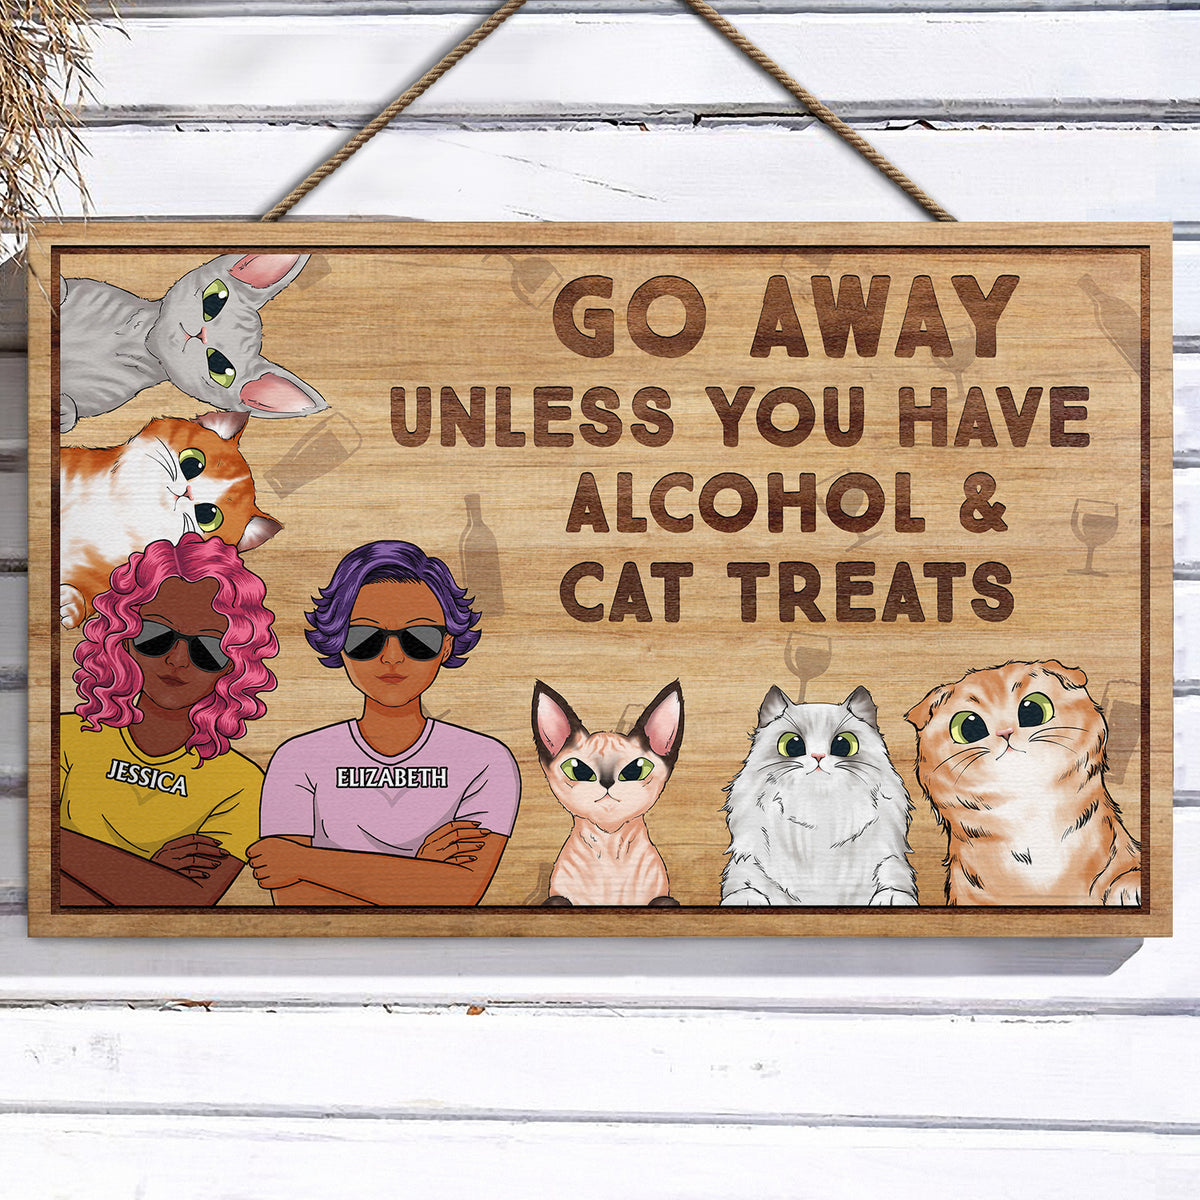 Go Away Unless You Brought Alcohol & Cat Treats - Cat Personalized